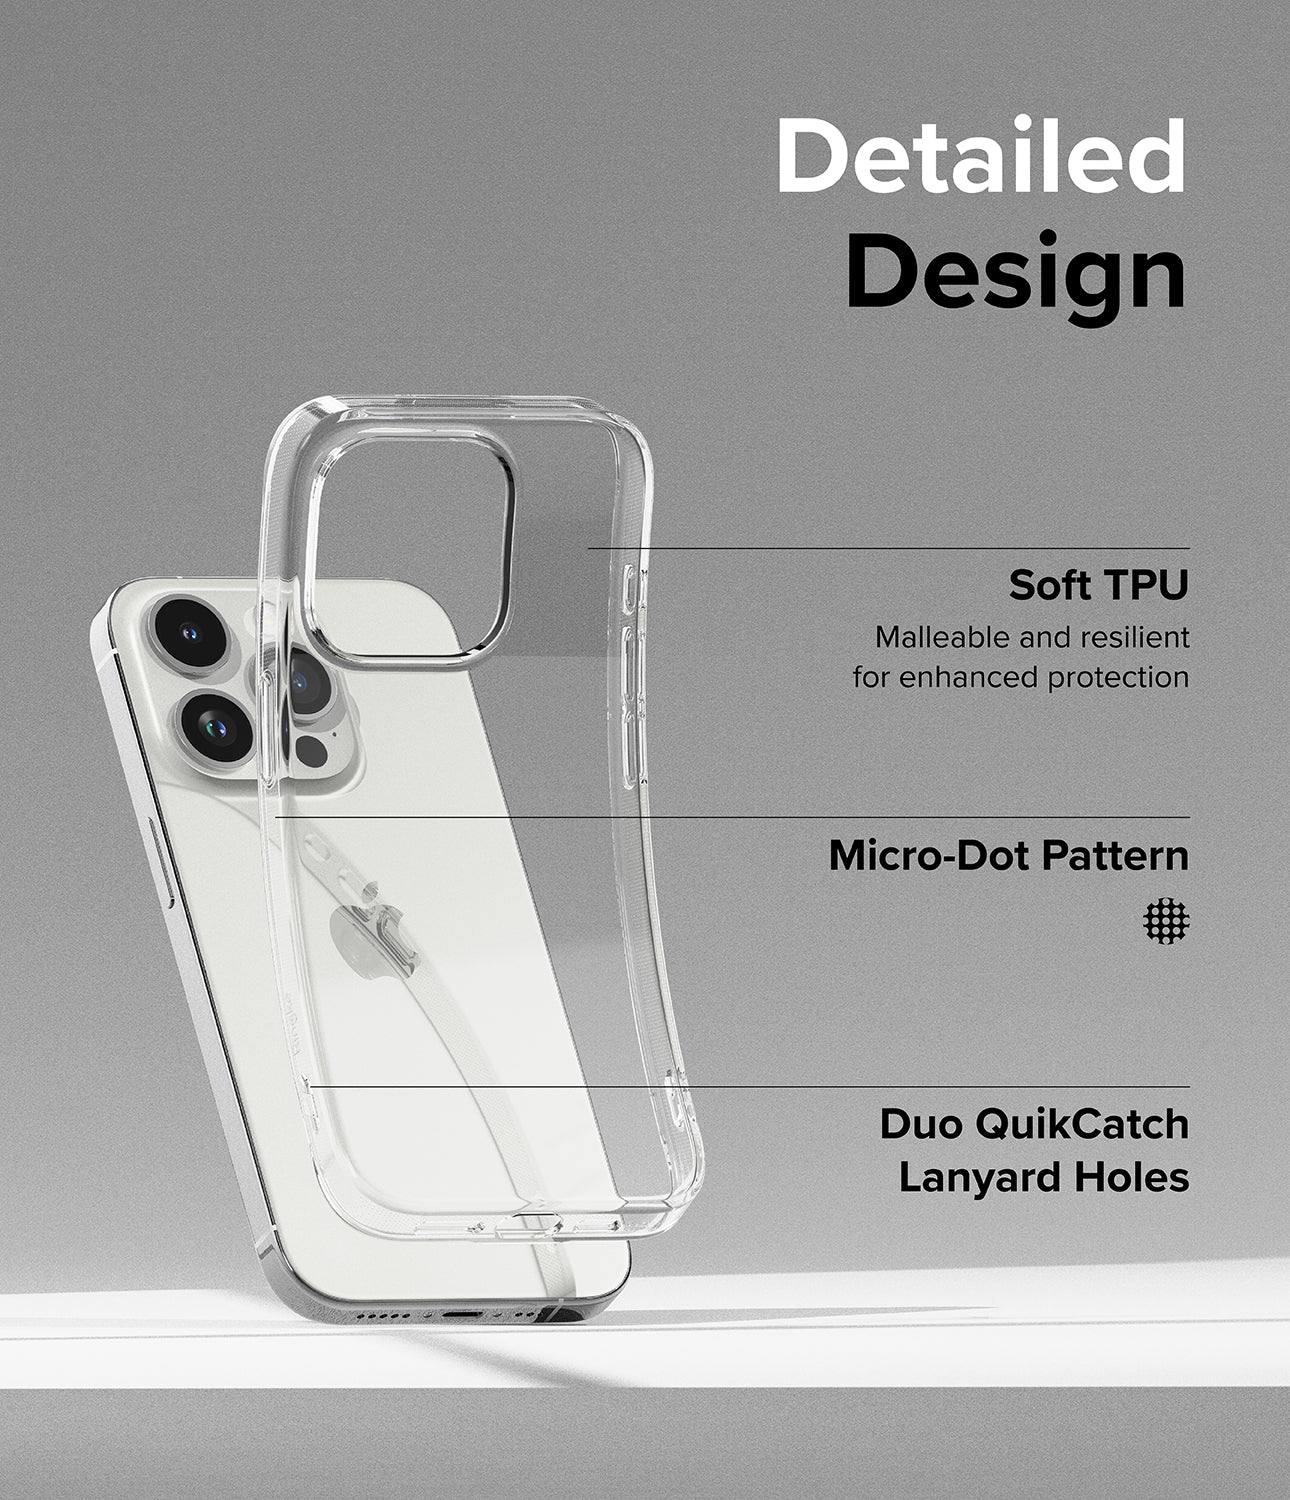 iPhone 15 Pro Max Case | Air Clear - Detailed Design. Malleable and resilient for enhanced protection with Soft TPU. Micro-Dot Pattern. Duo QuikCatch Lanyard Holes